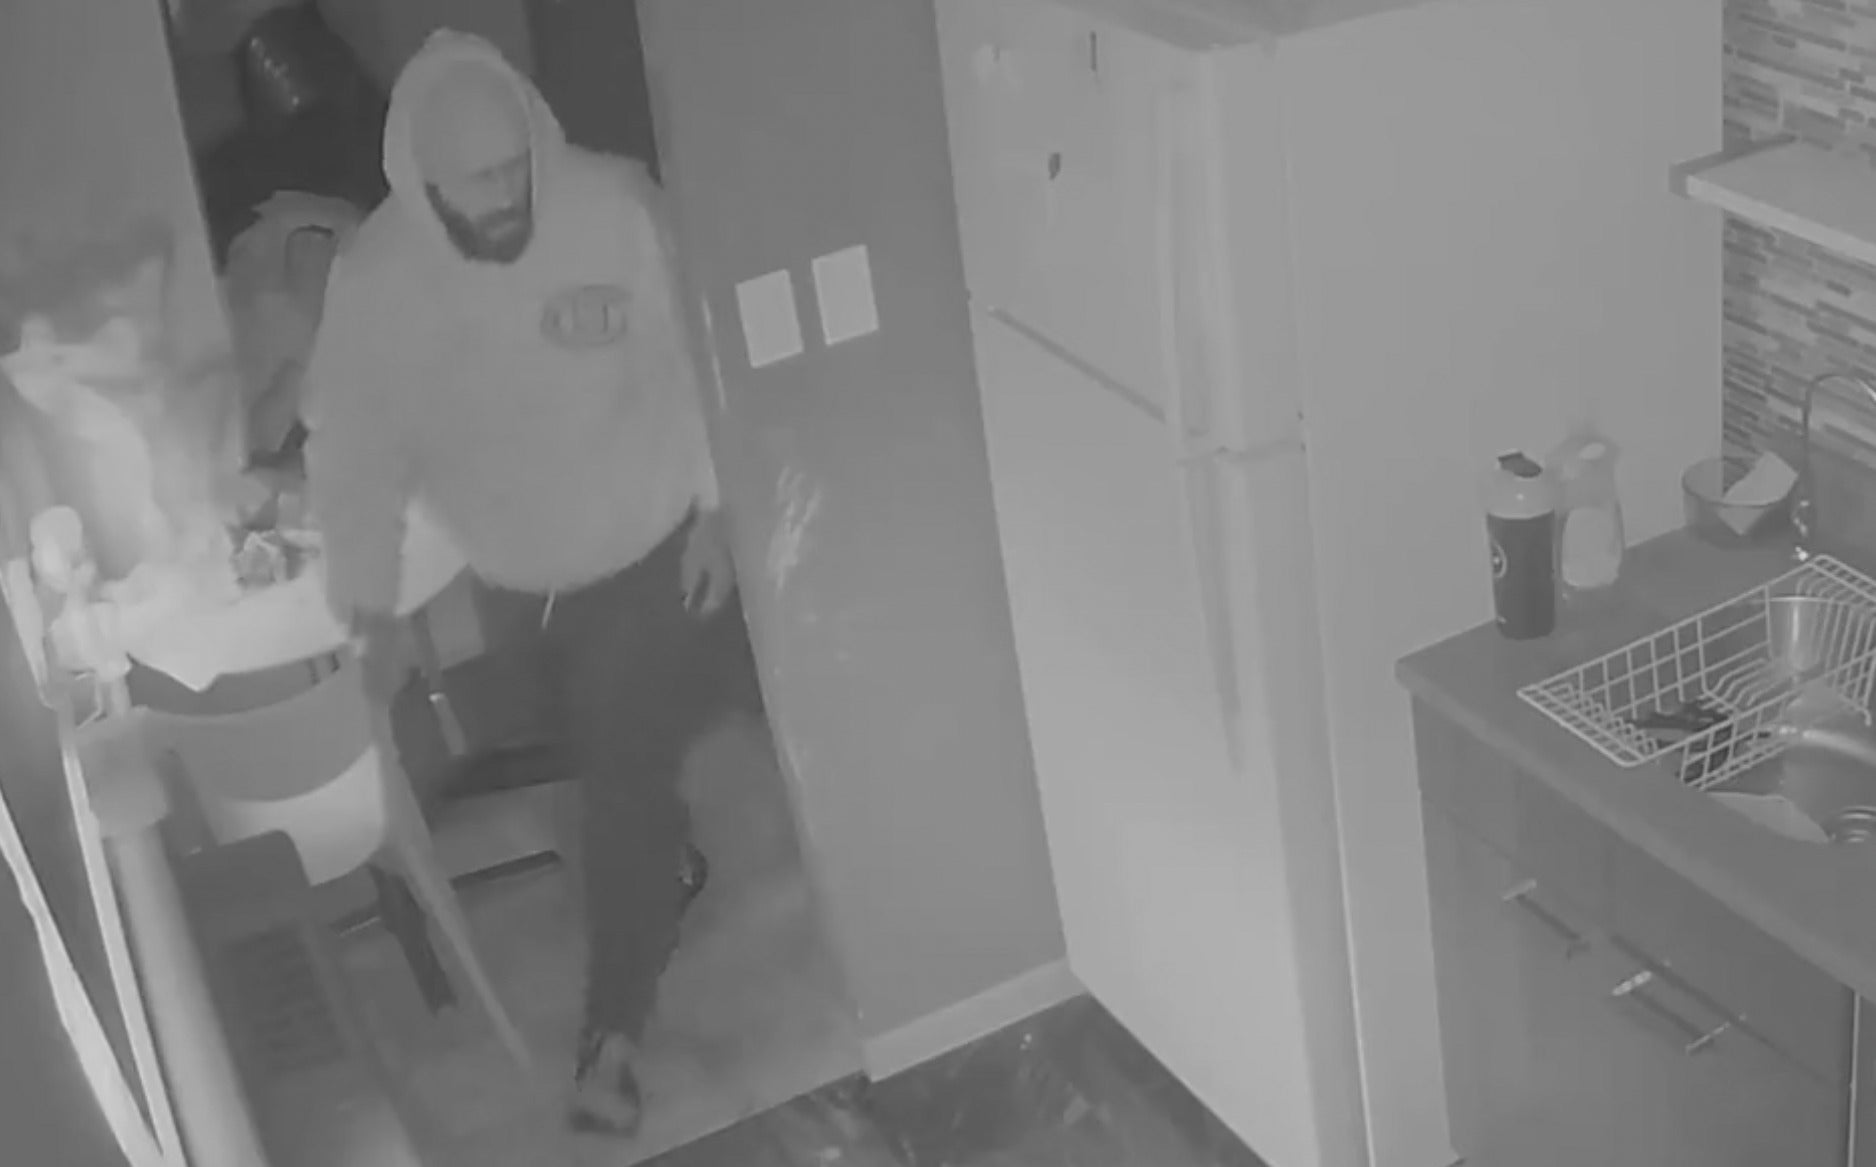 The robbers kicked the homeowner in the face before stealing his valuable watches